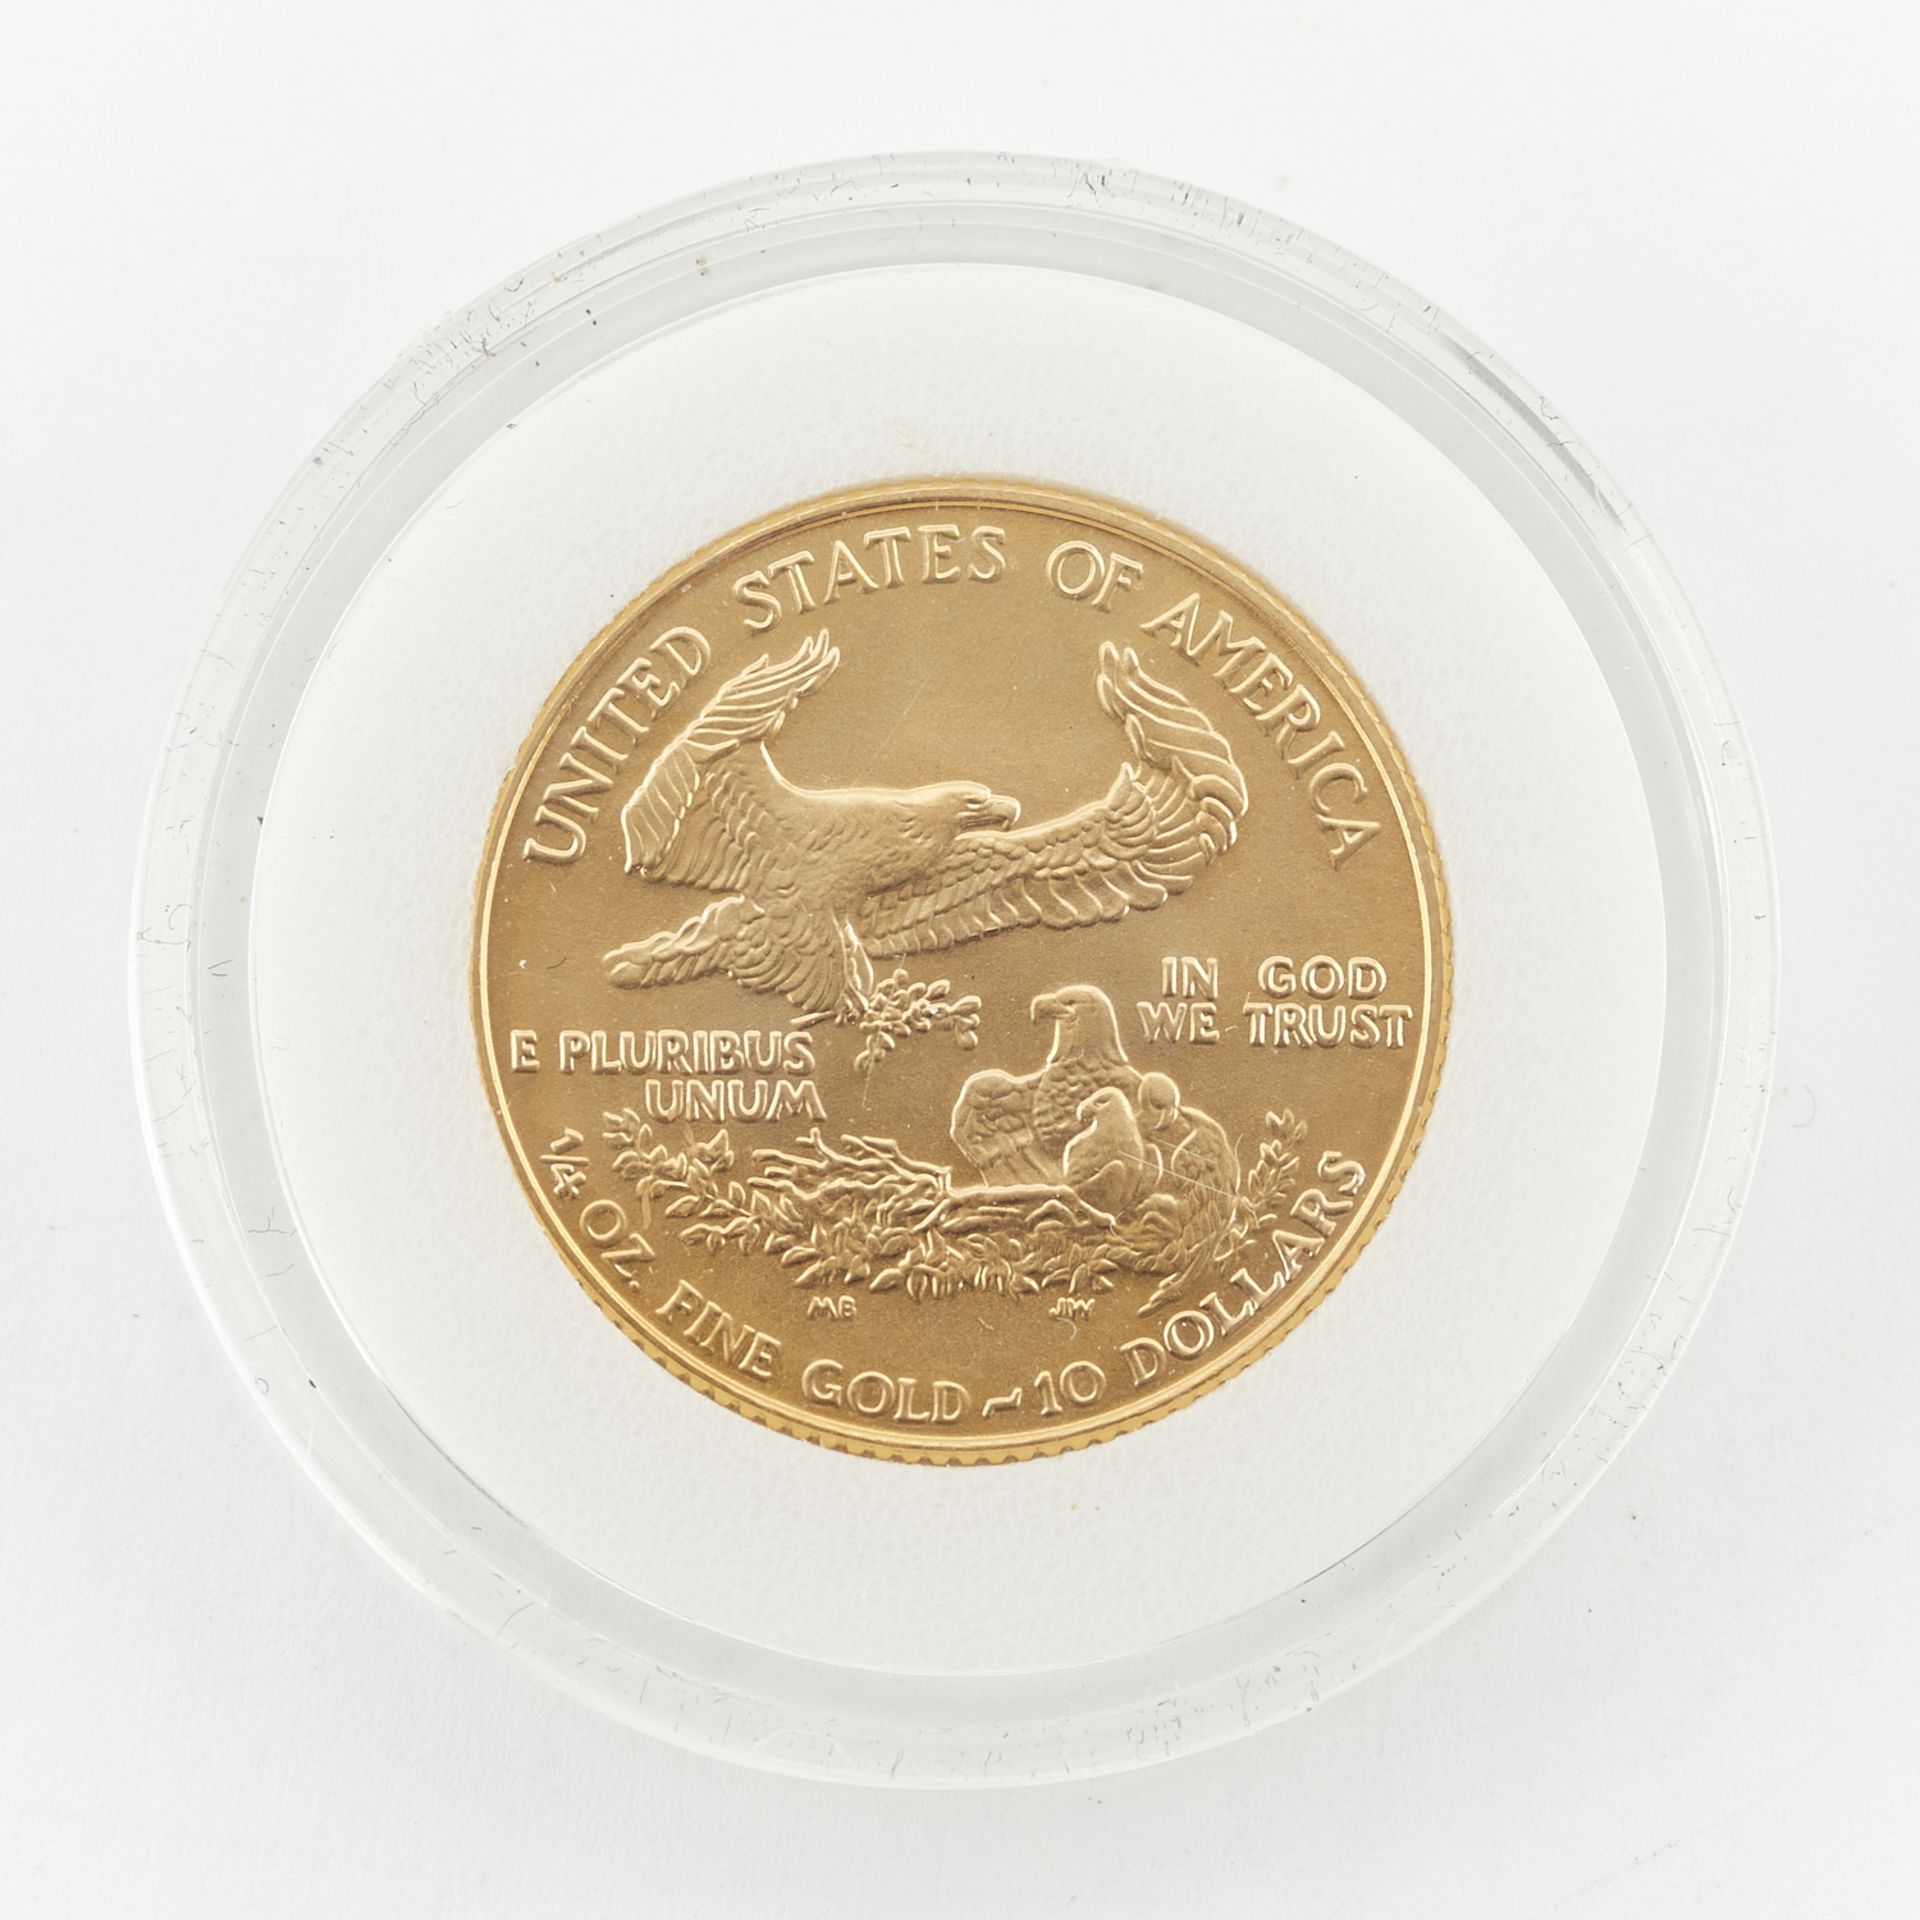 1986 $10 1/4 oz Gold American Eagle Coin - Image 2 of 2